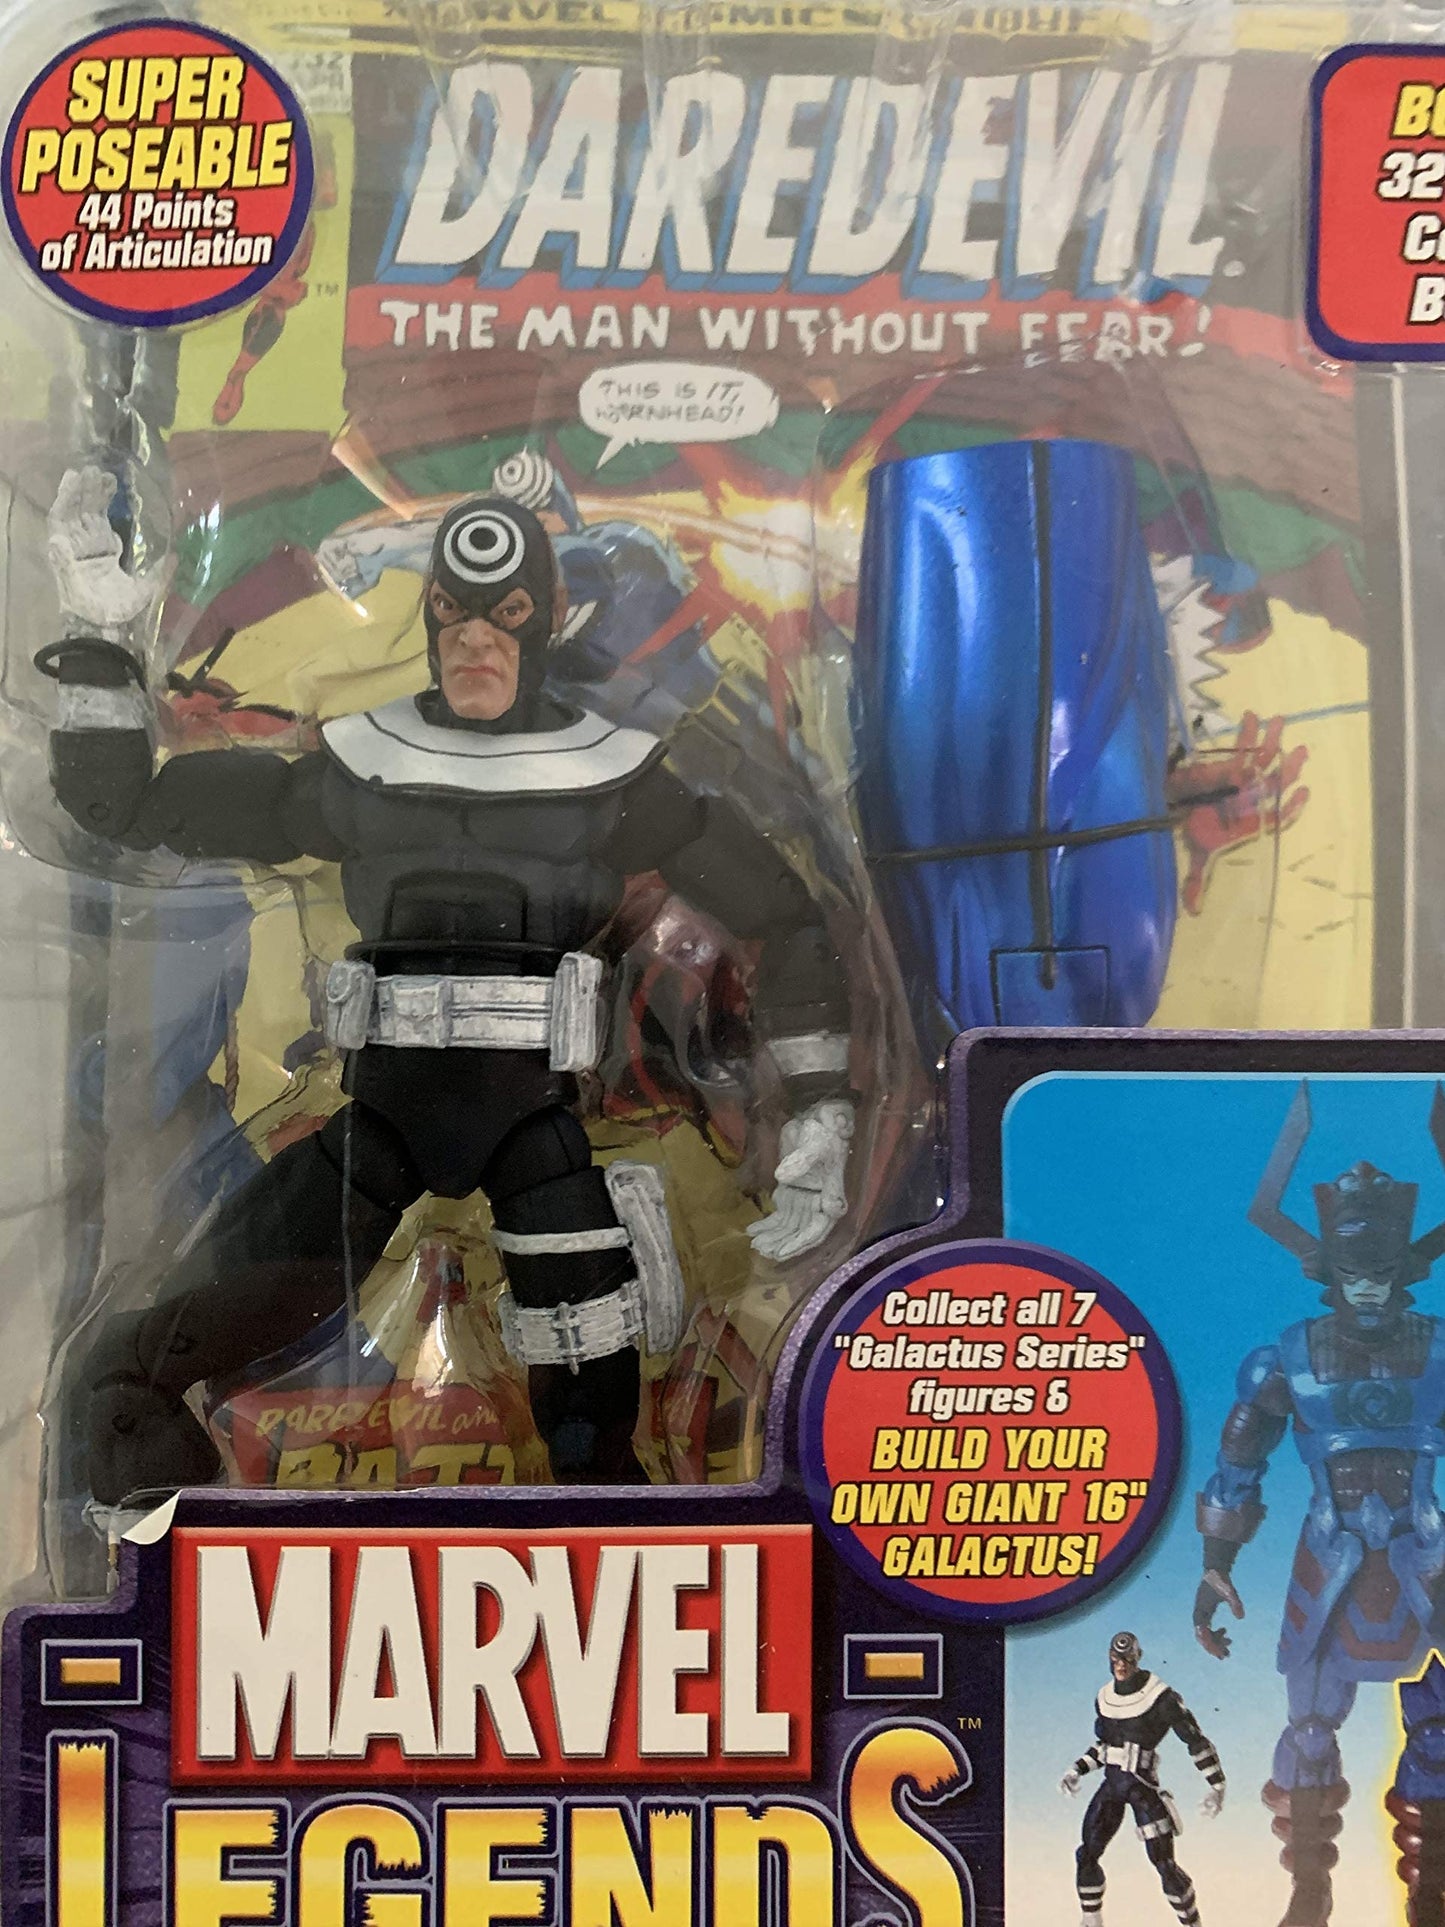 Vintage Marvel Legends Galactus Series Bullseye Highly Detailed Poseable Action Figure - Brand New Factory Sealed Shop Stock Room Find